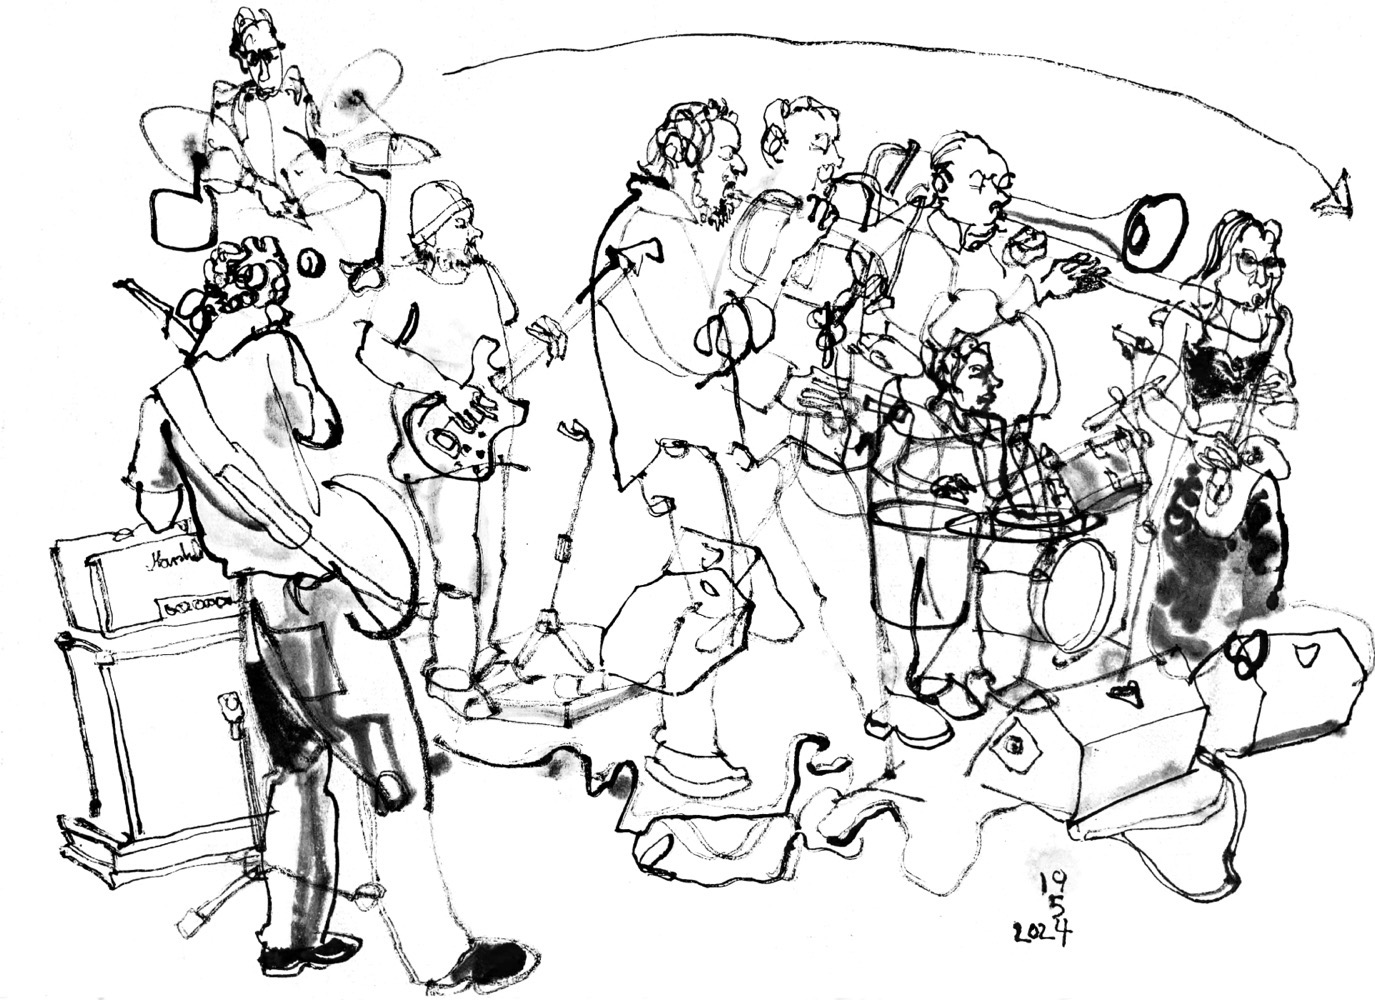 Ink drawing of a lot of musicians.